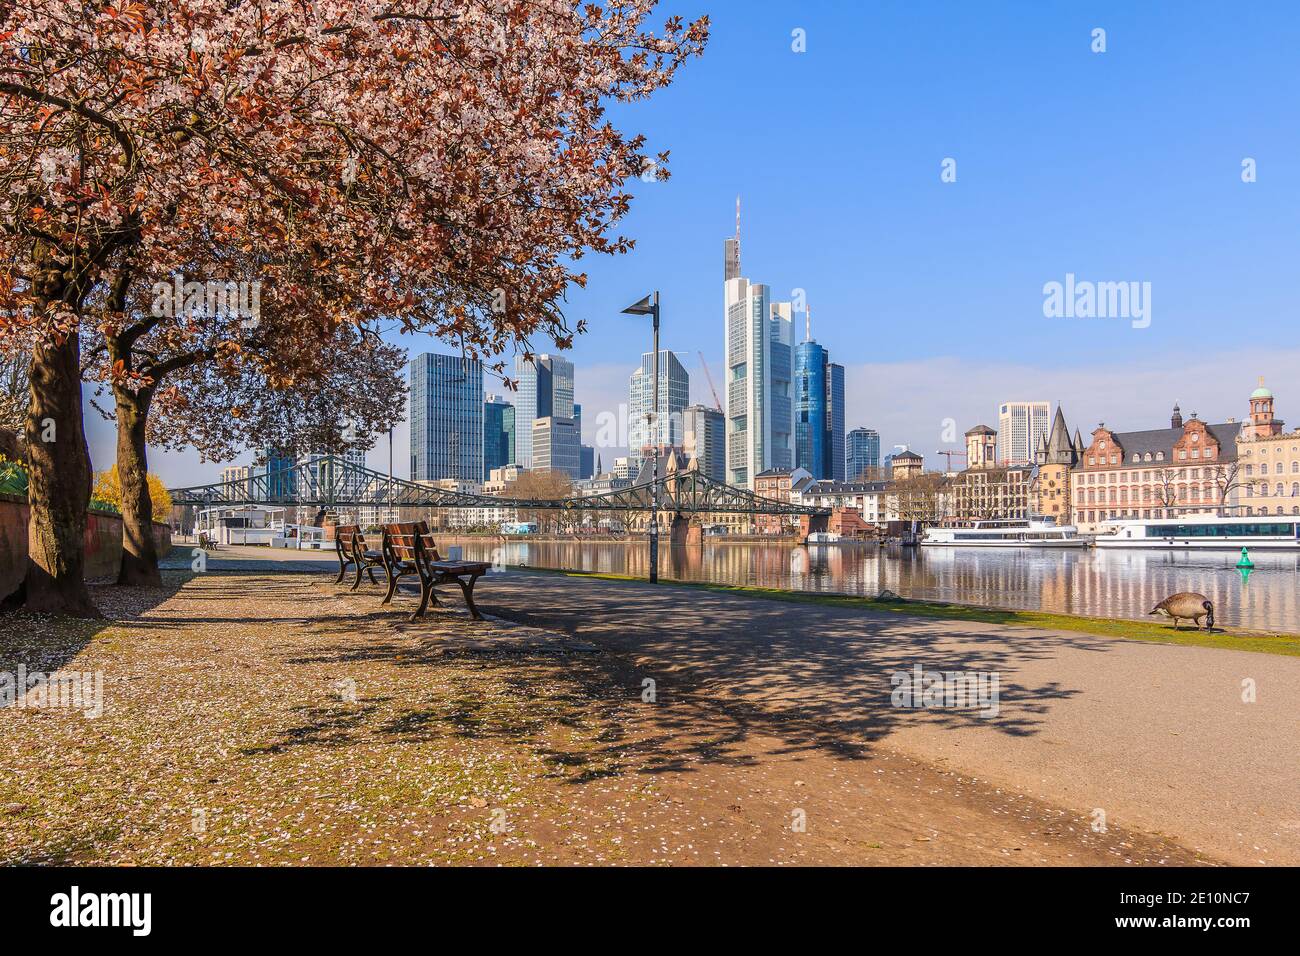 Skyline with skyscrapers of Frankfurt with the river Main. Main bank with path. Tree with blossom and benches in spring. Reflections in the water Stock Photo